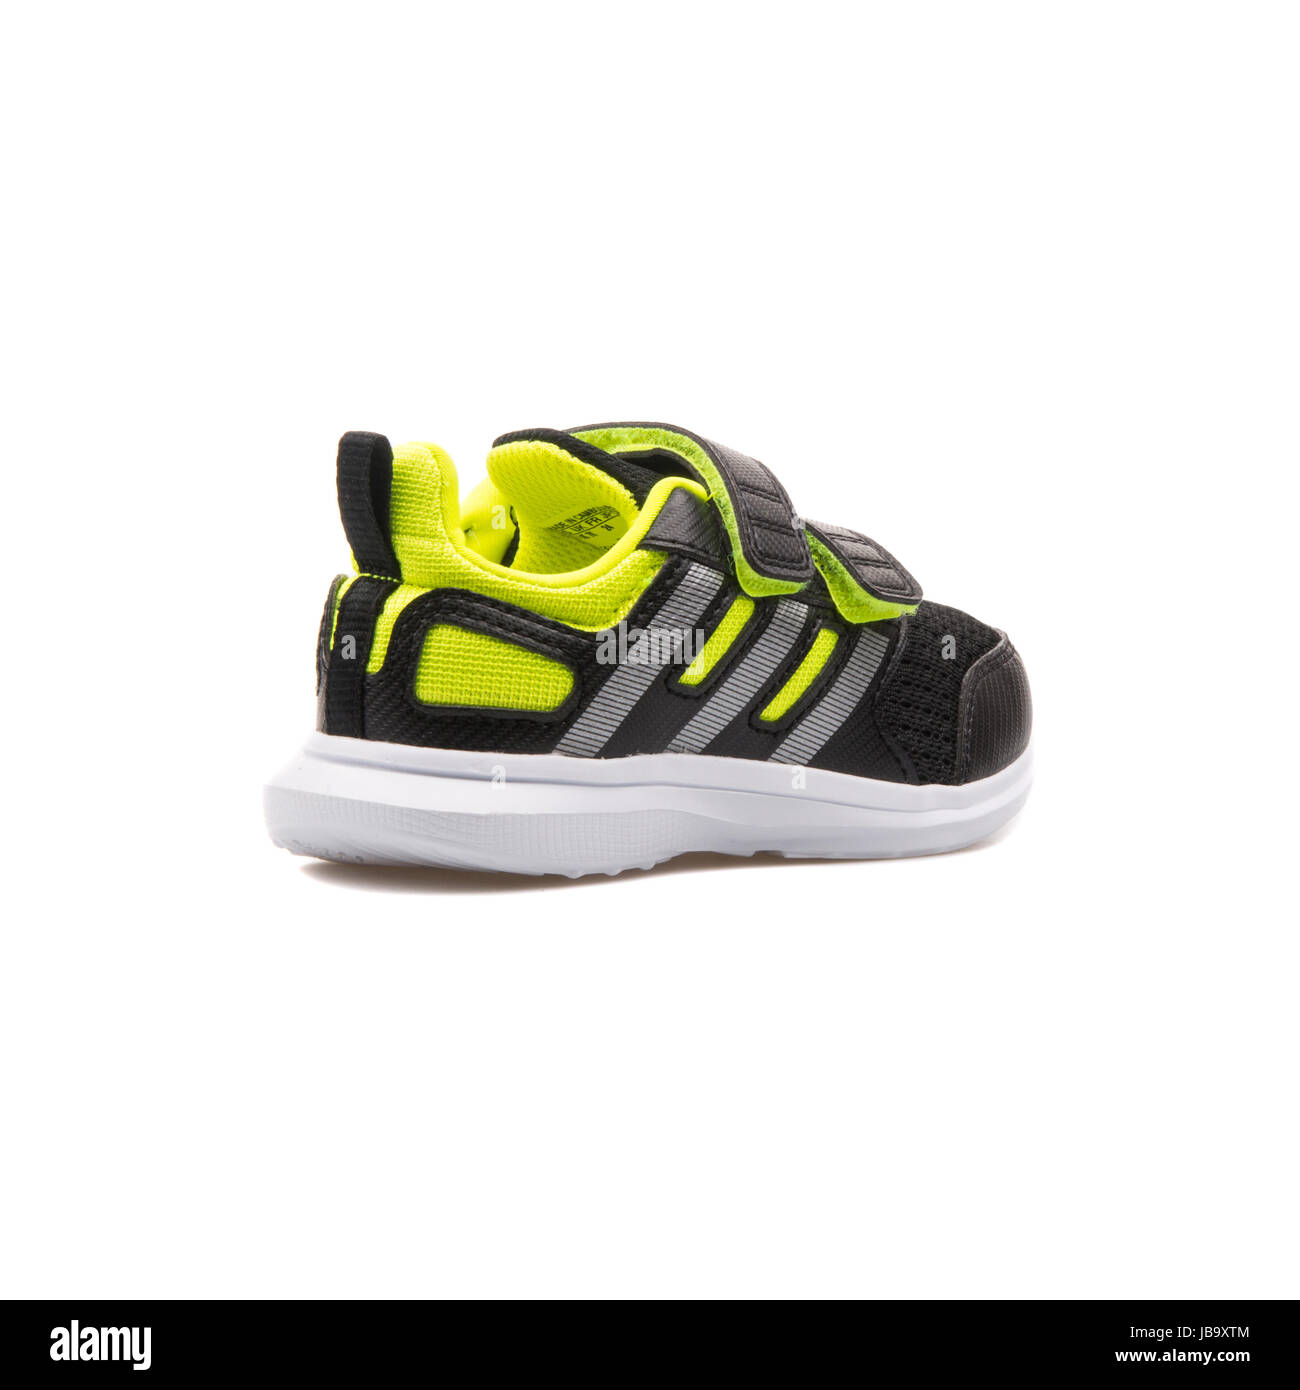 Adidas Hyperfast 2.0 CF i Black and Neon Yellow Children's Sports Shoes -  B23845 Stock Photo - Alamy